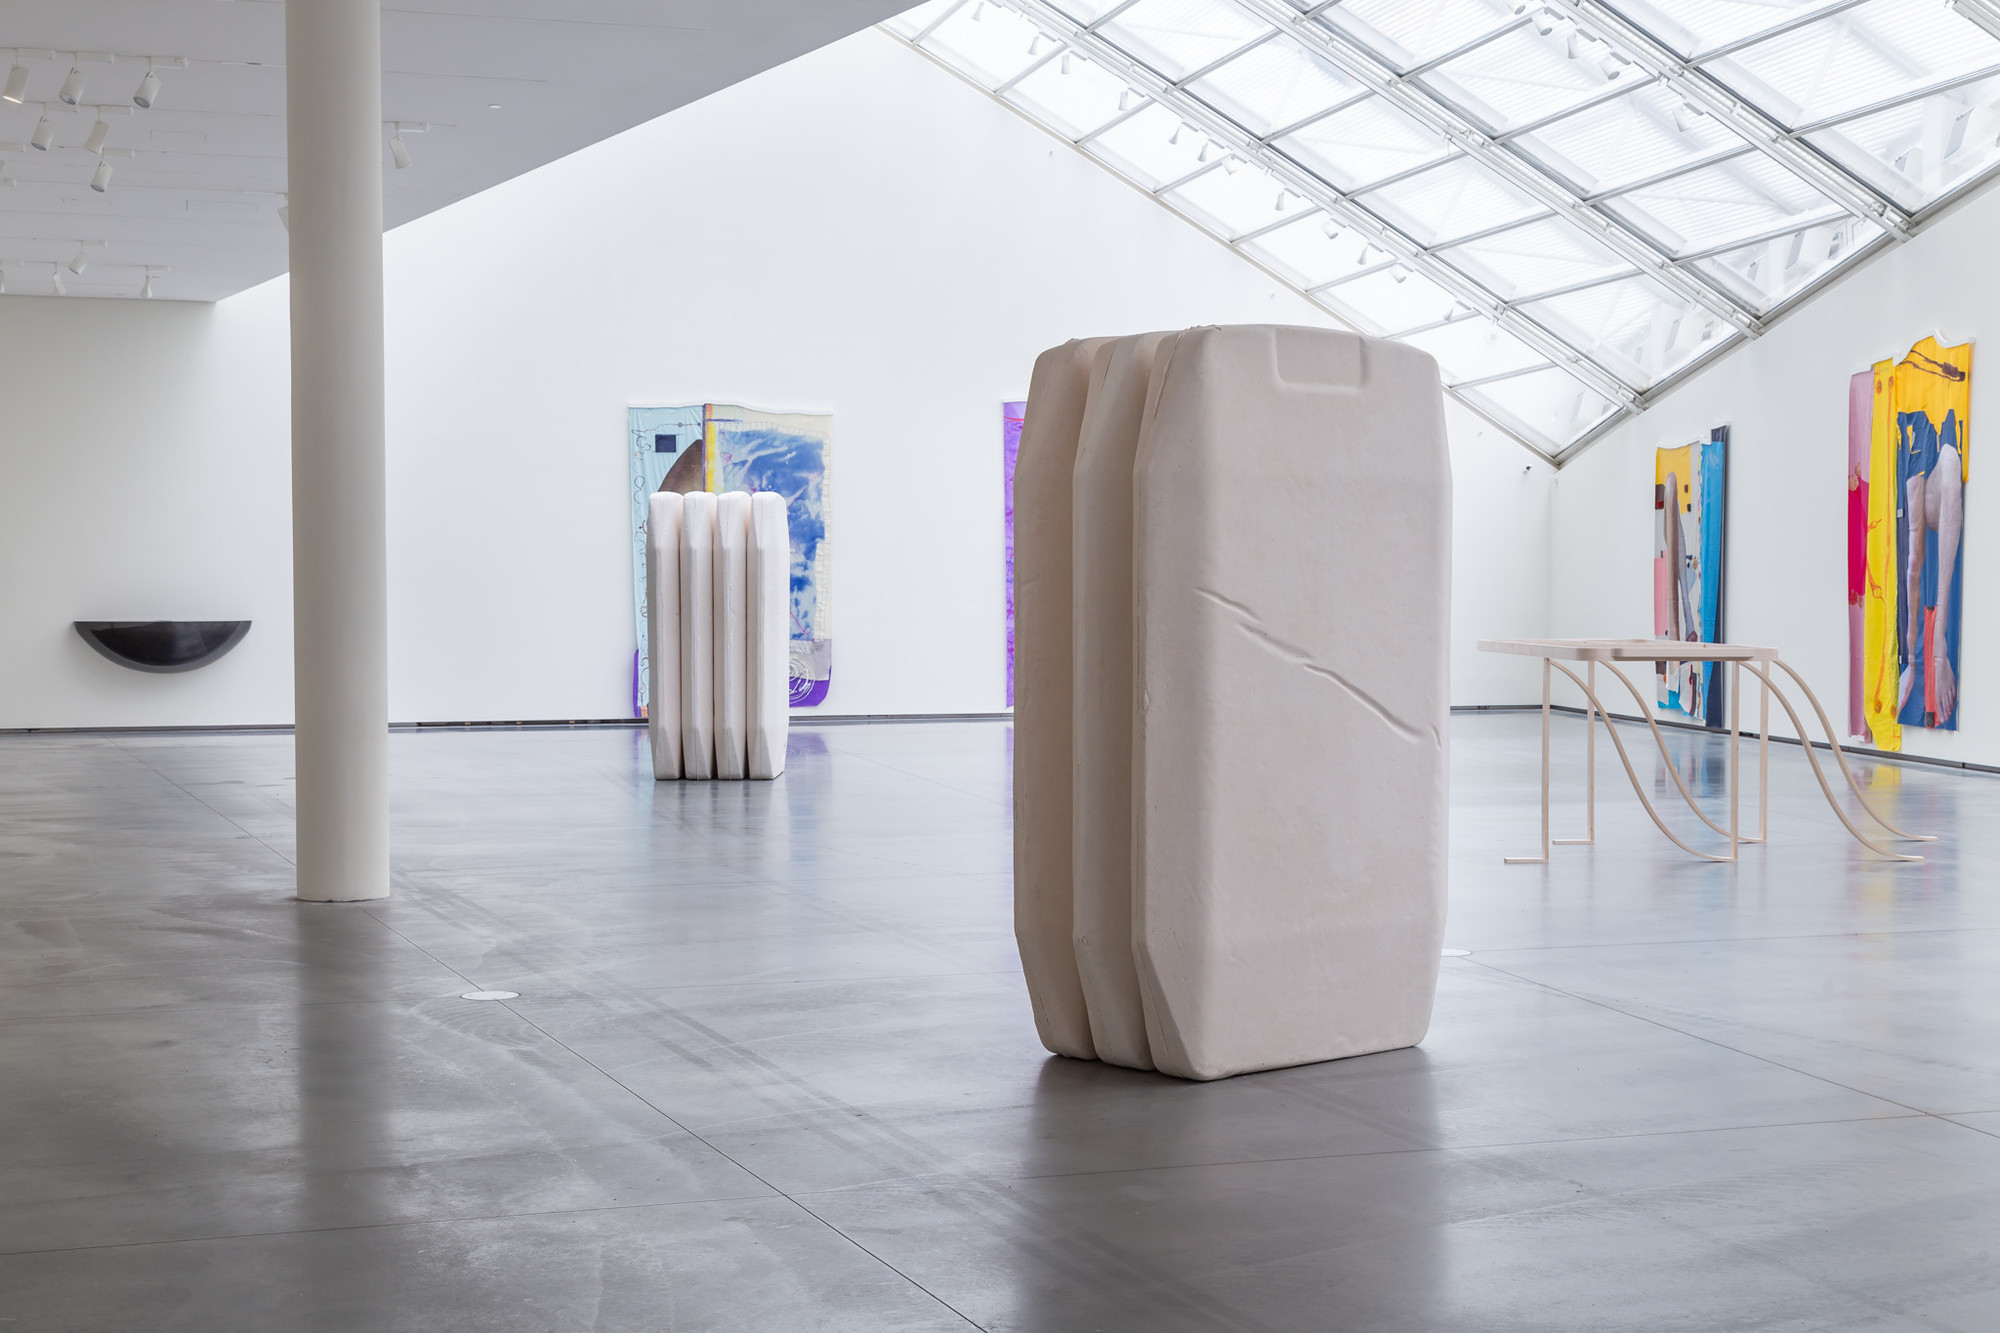 Beholder #2 / Container #2. Acrylic One and fiberglass, 240 x 90 x 148 cm. Installation view from the exhibition Sol og Vår i Januar at the Astrup Fearnley Museum in 2018.